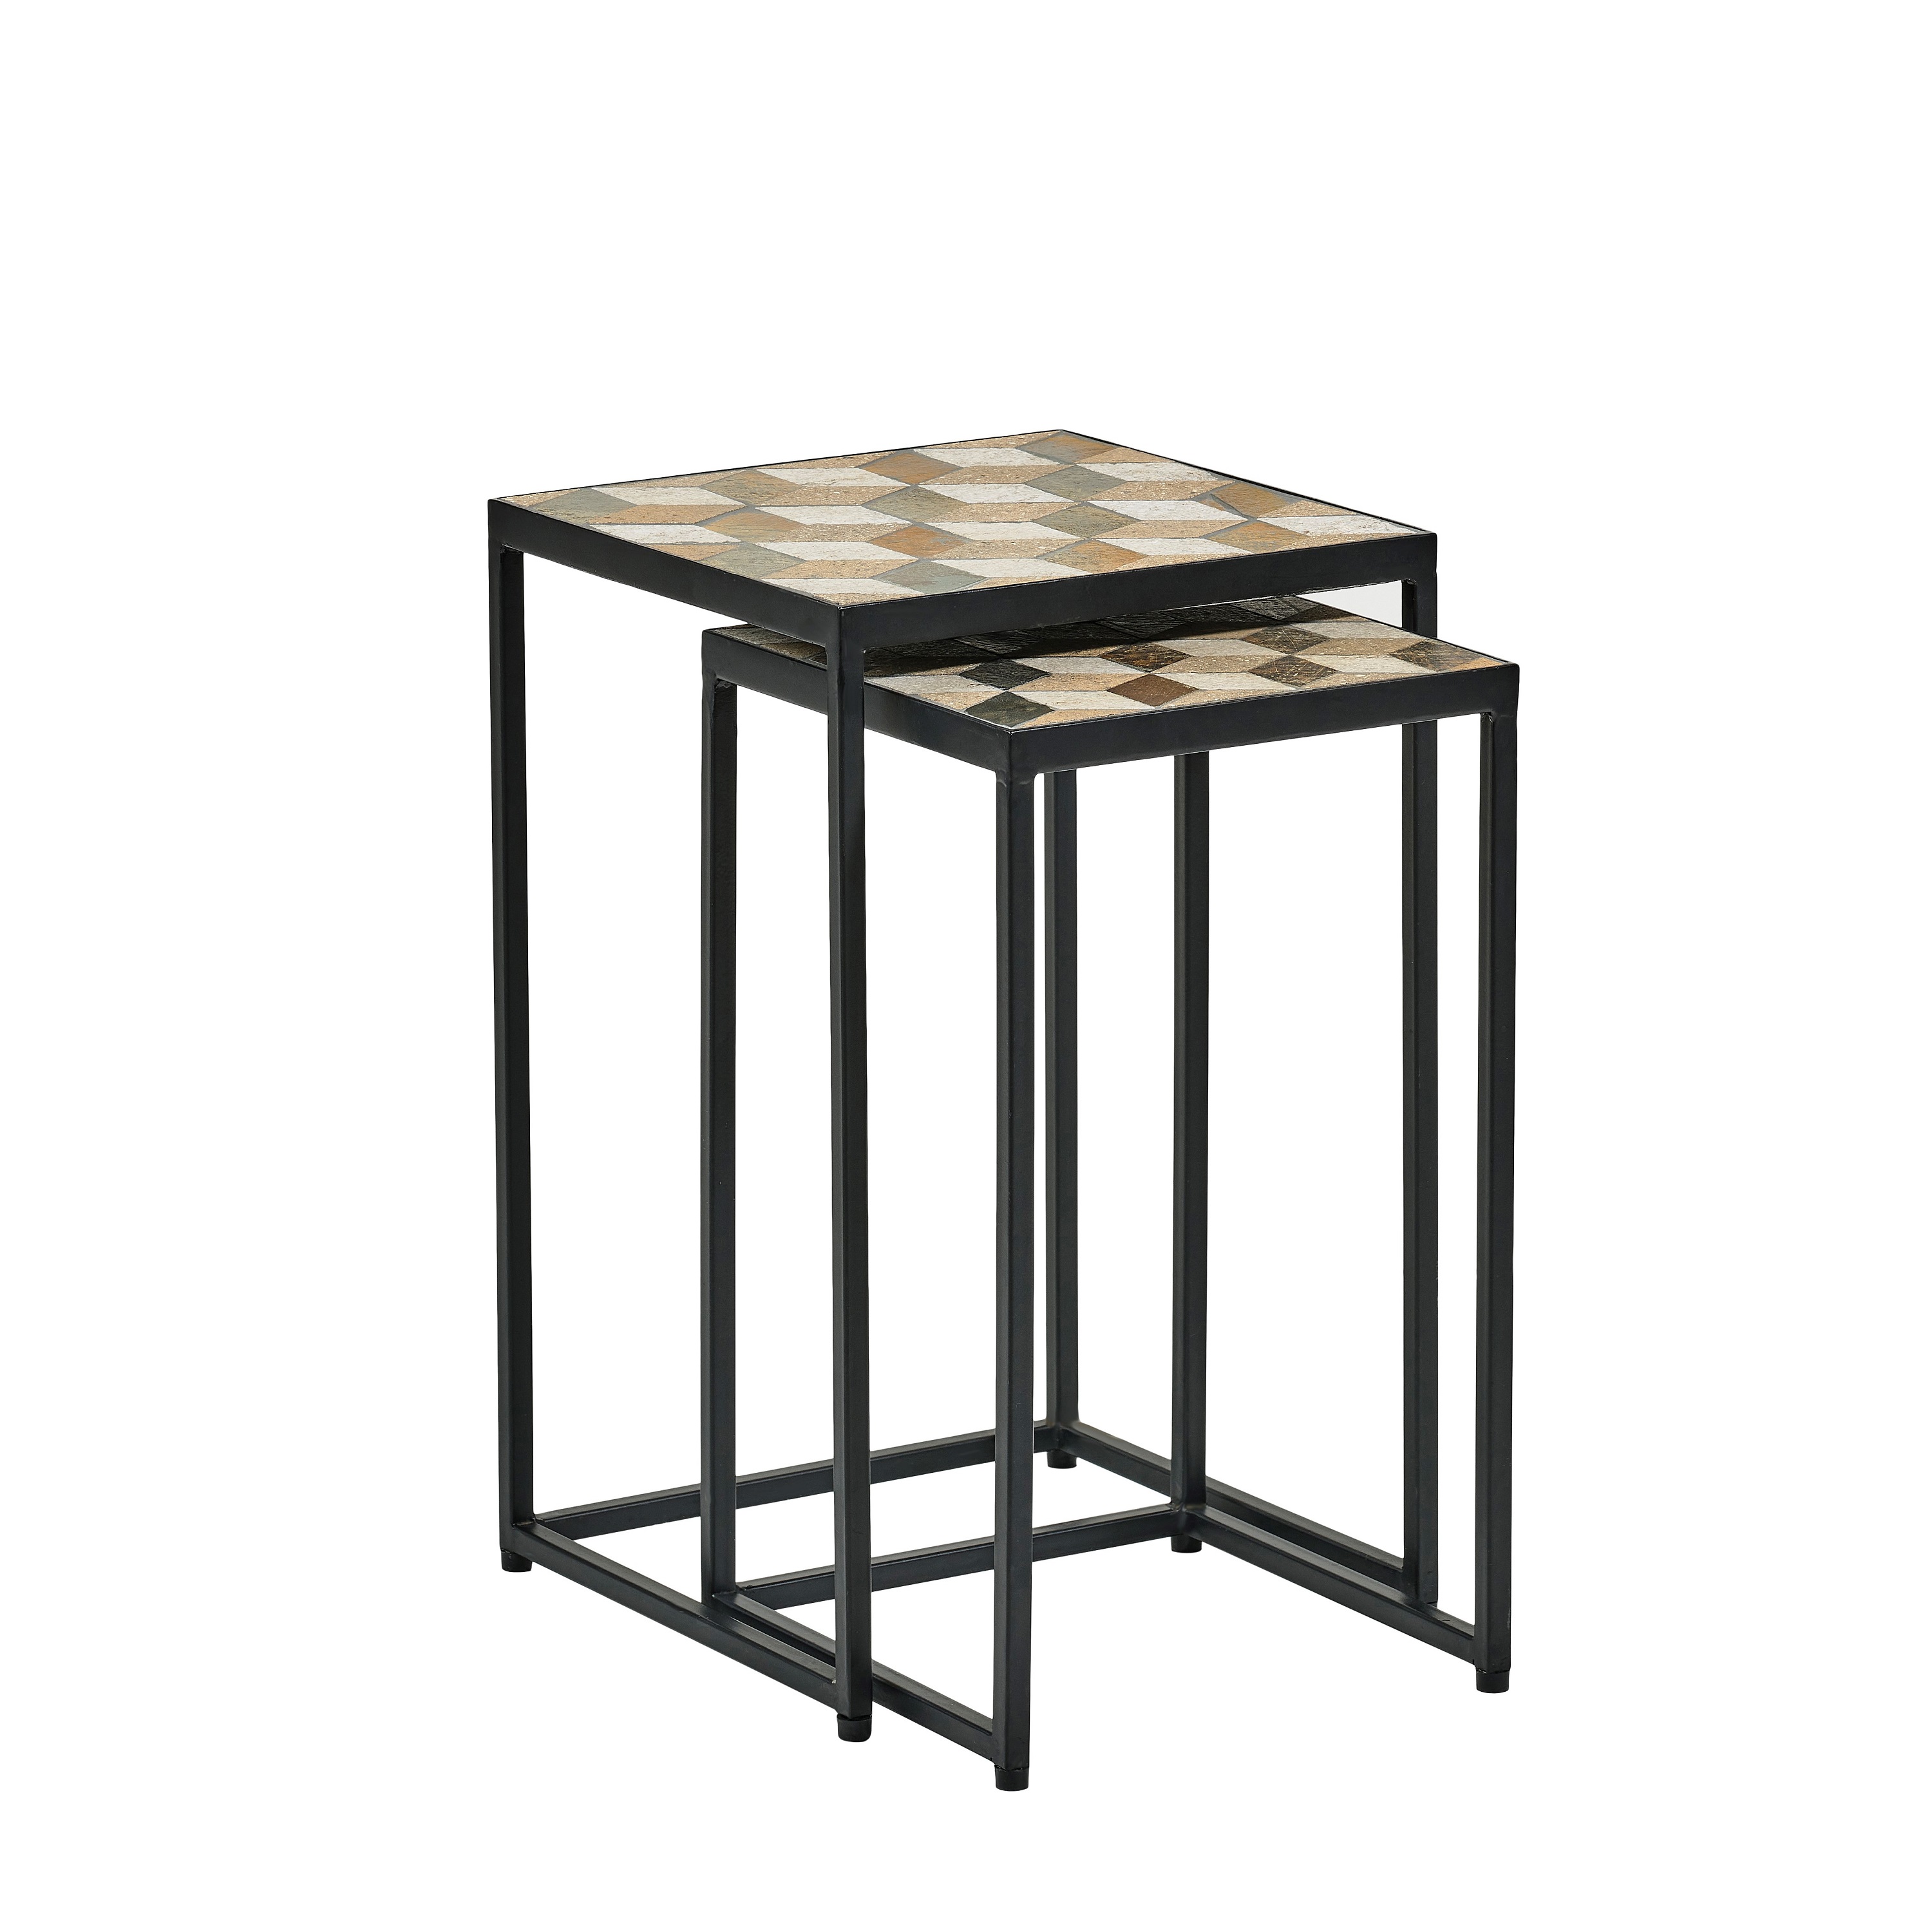 Villa Collection Nest of 2 Black Iron Side Tables with Stone Insert Tops